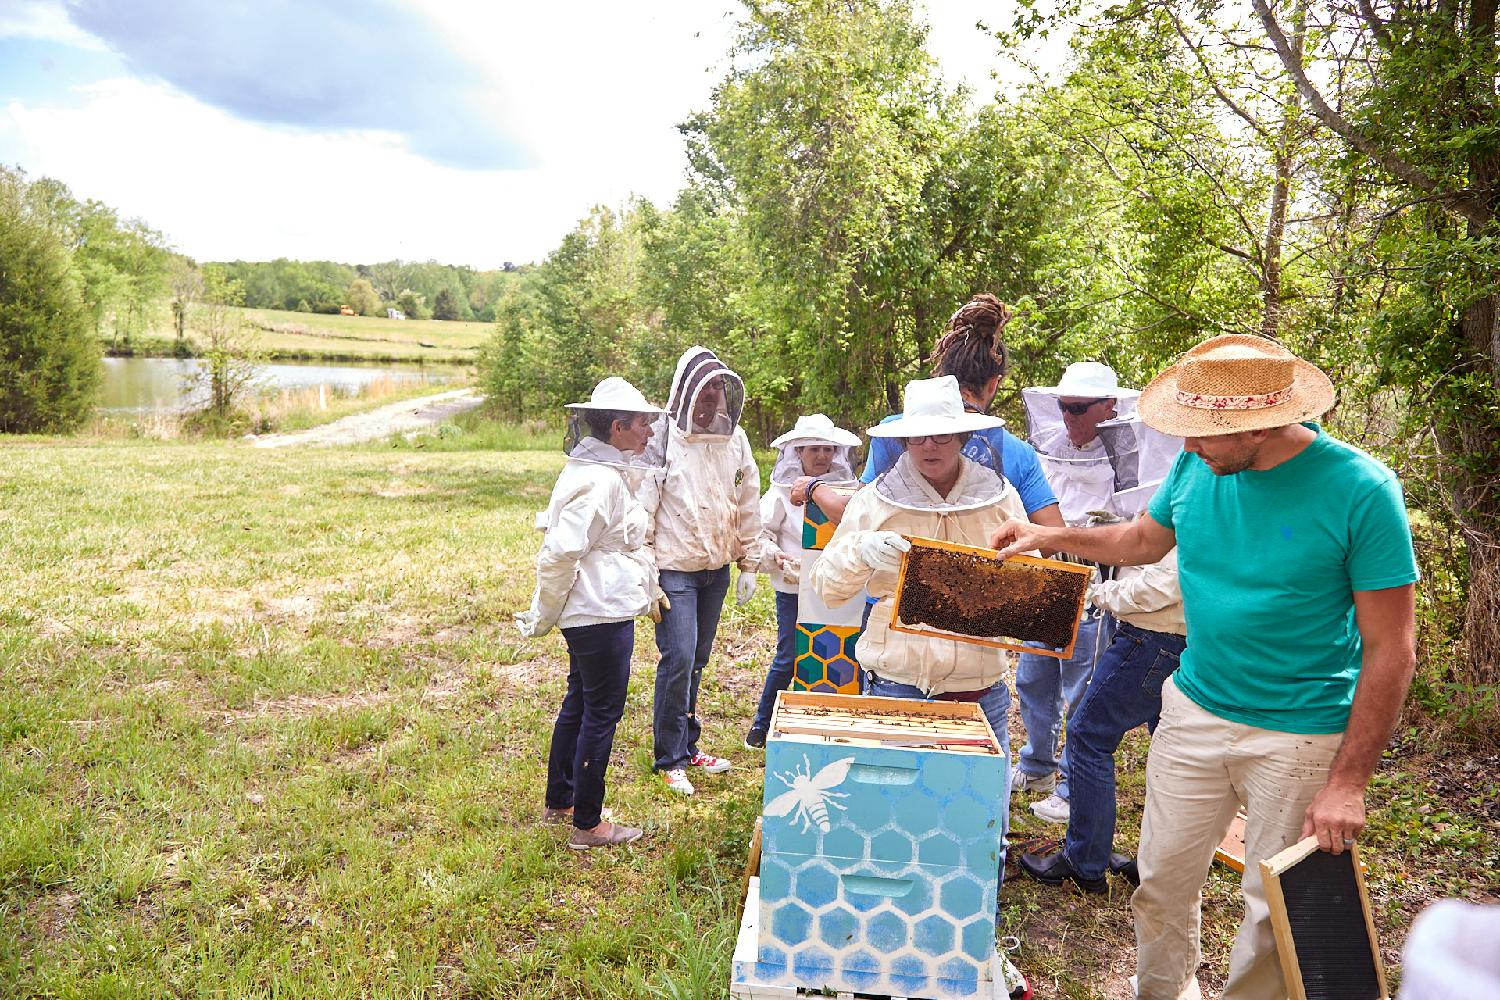 SAS prioritizes sustainability initiatives like solar farms, free electric vehicle charging stations & office beehives.